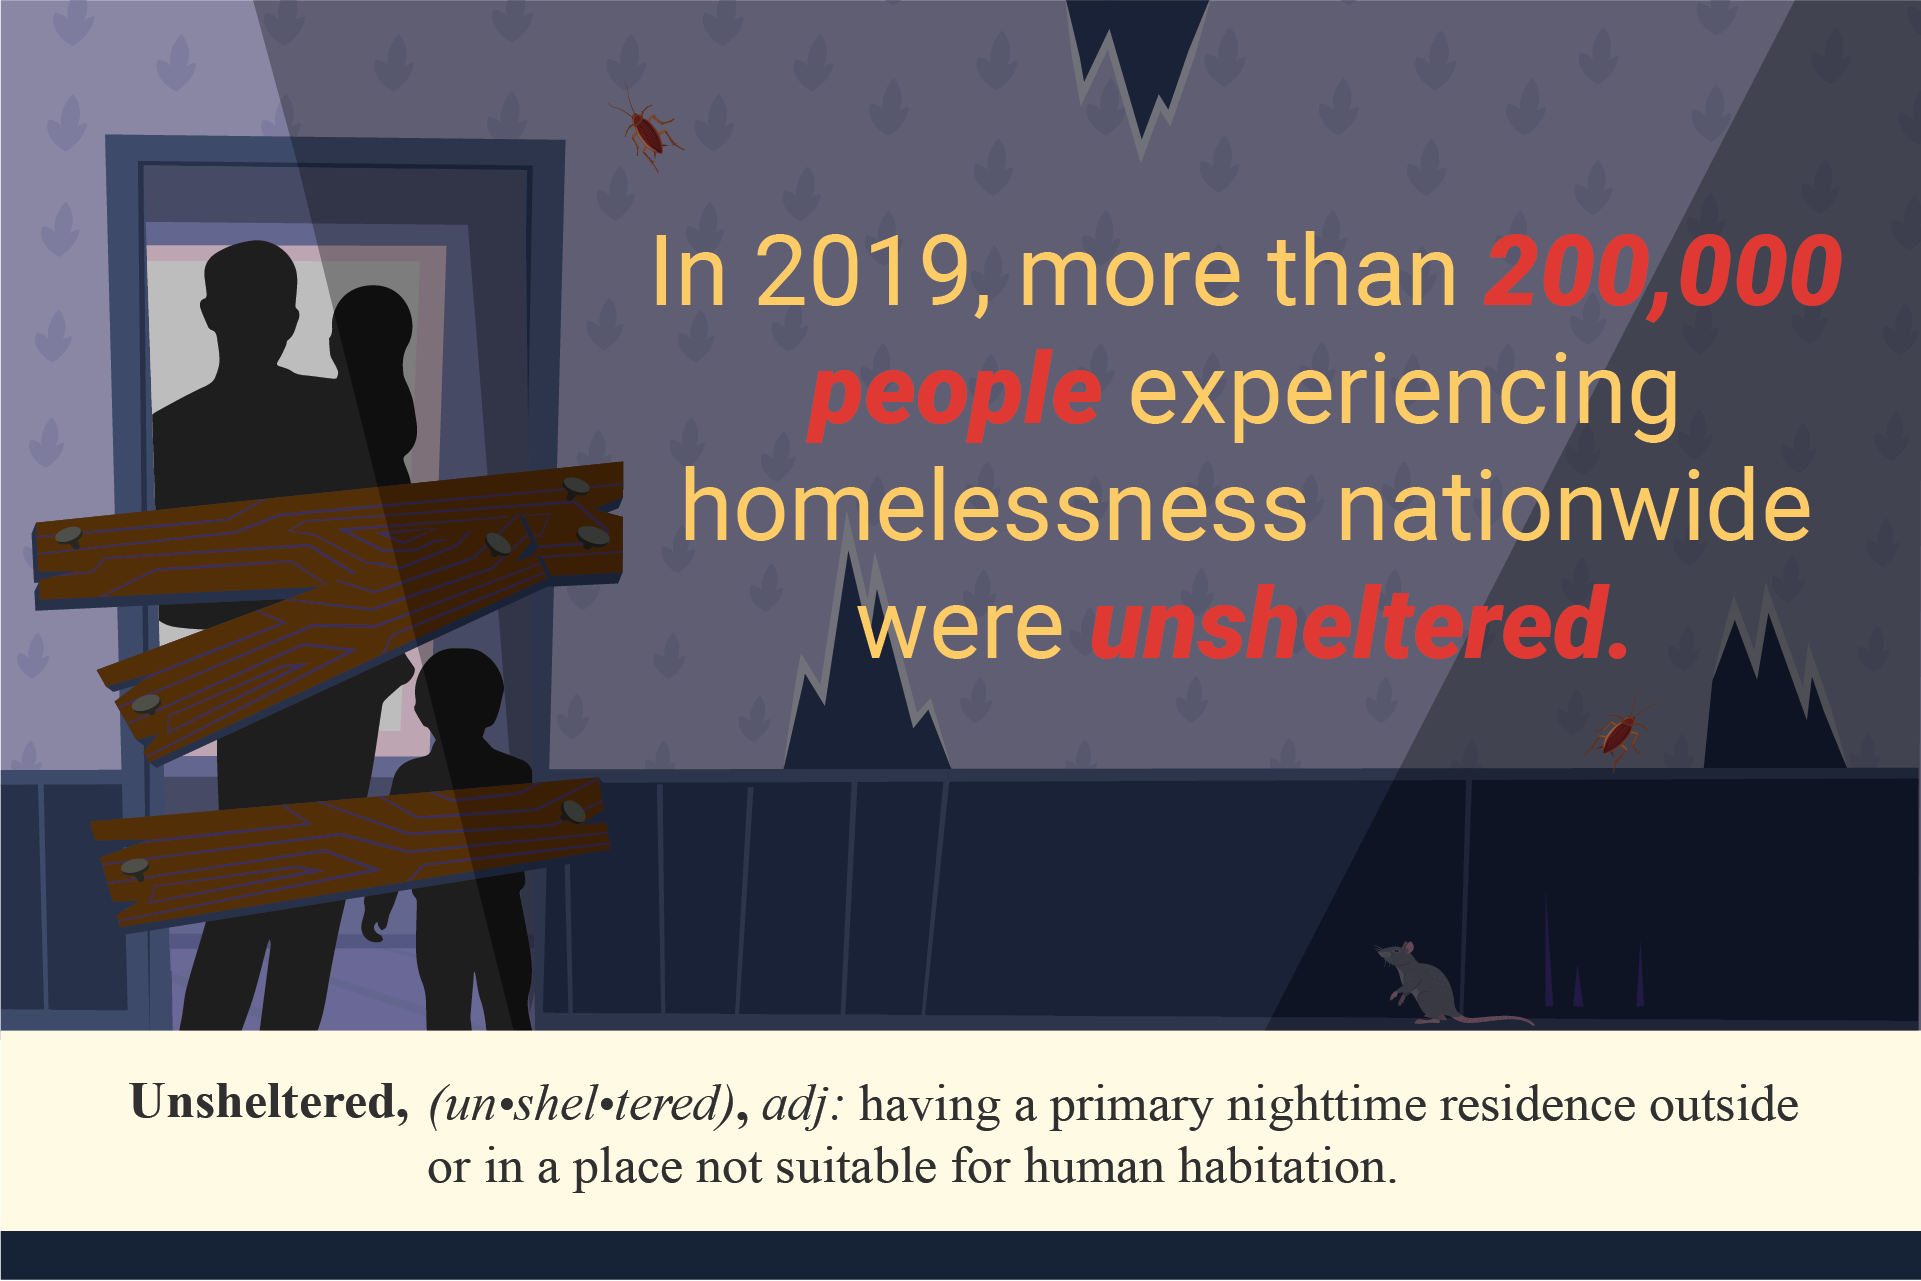 In 2019, more than 200,000 people experiencing homelessness nationwide were unsheltered.